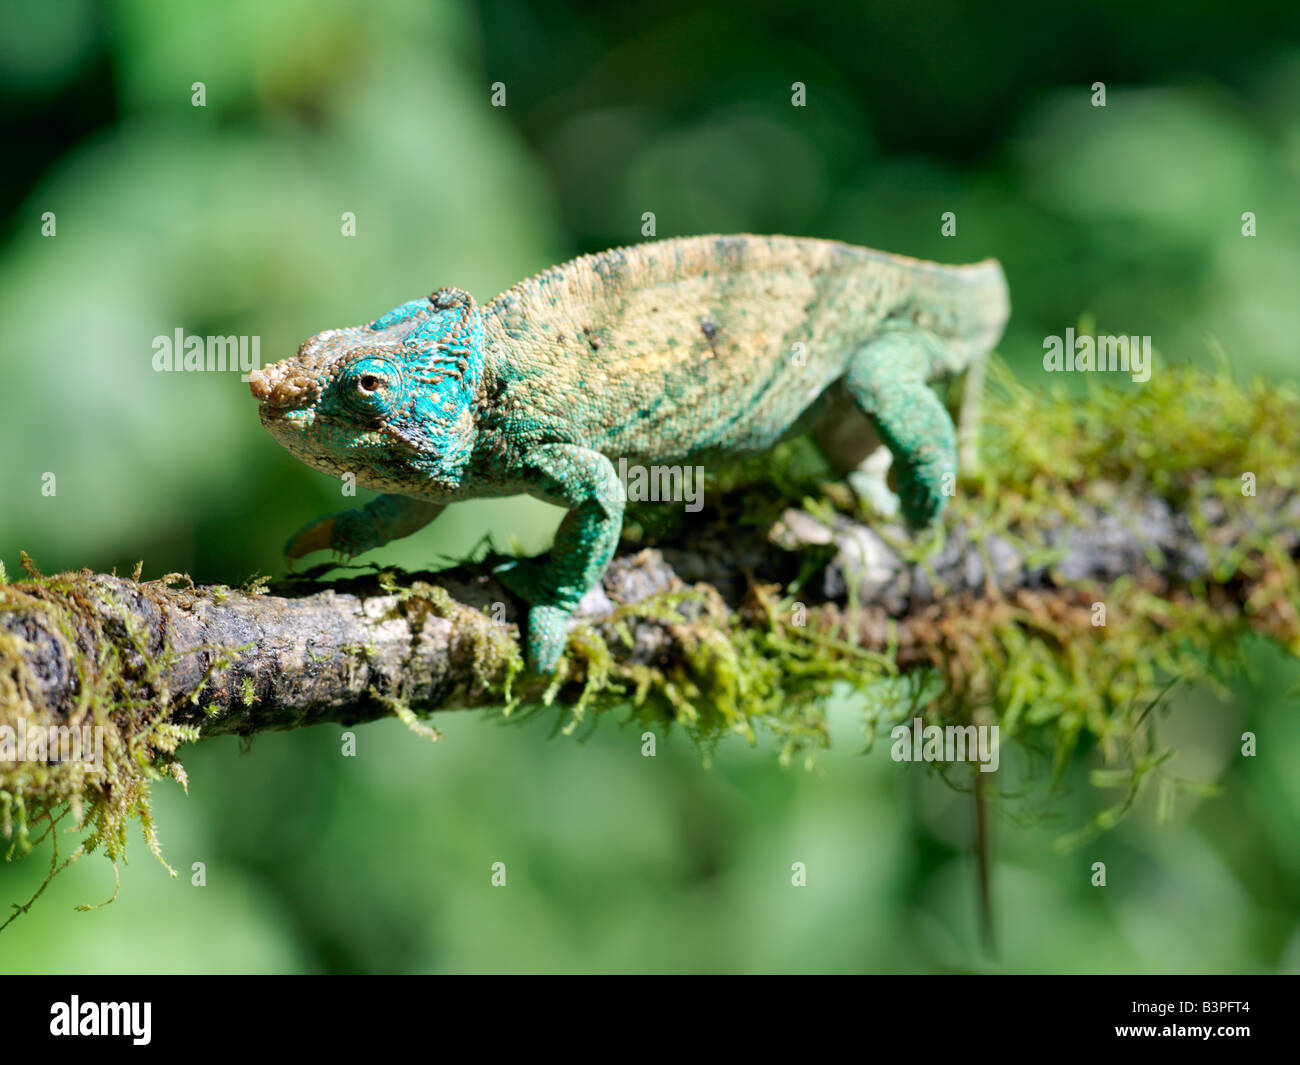 Northern Madagascar, The only chameleon endemic to the rainforest of